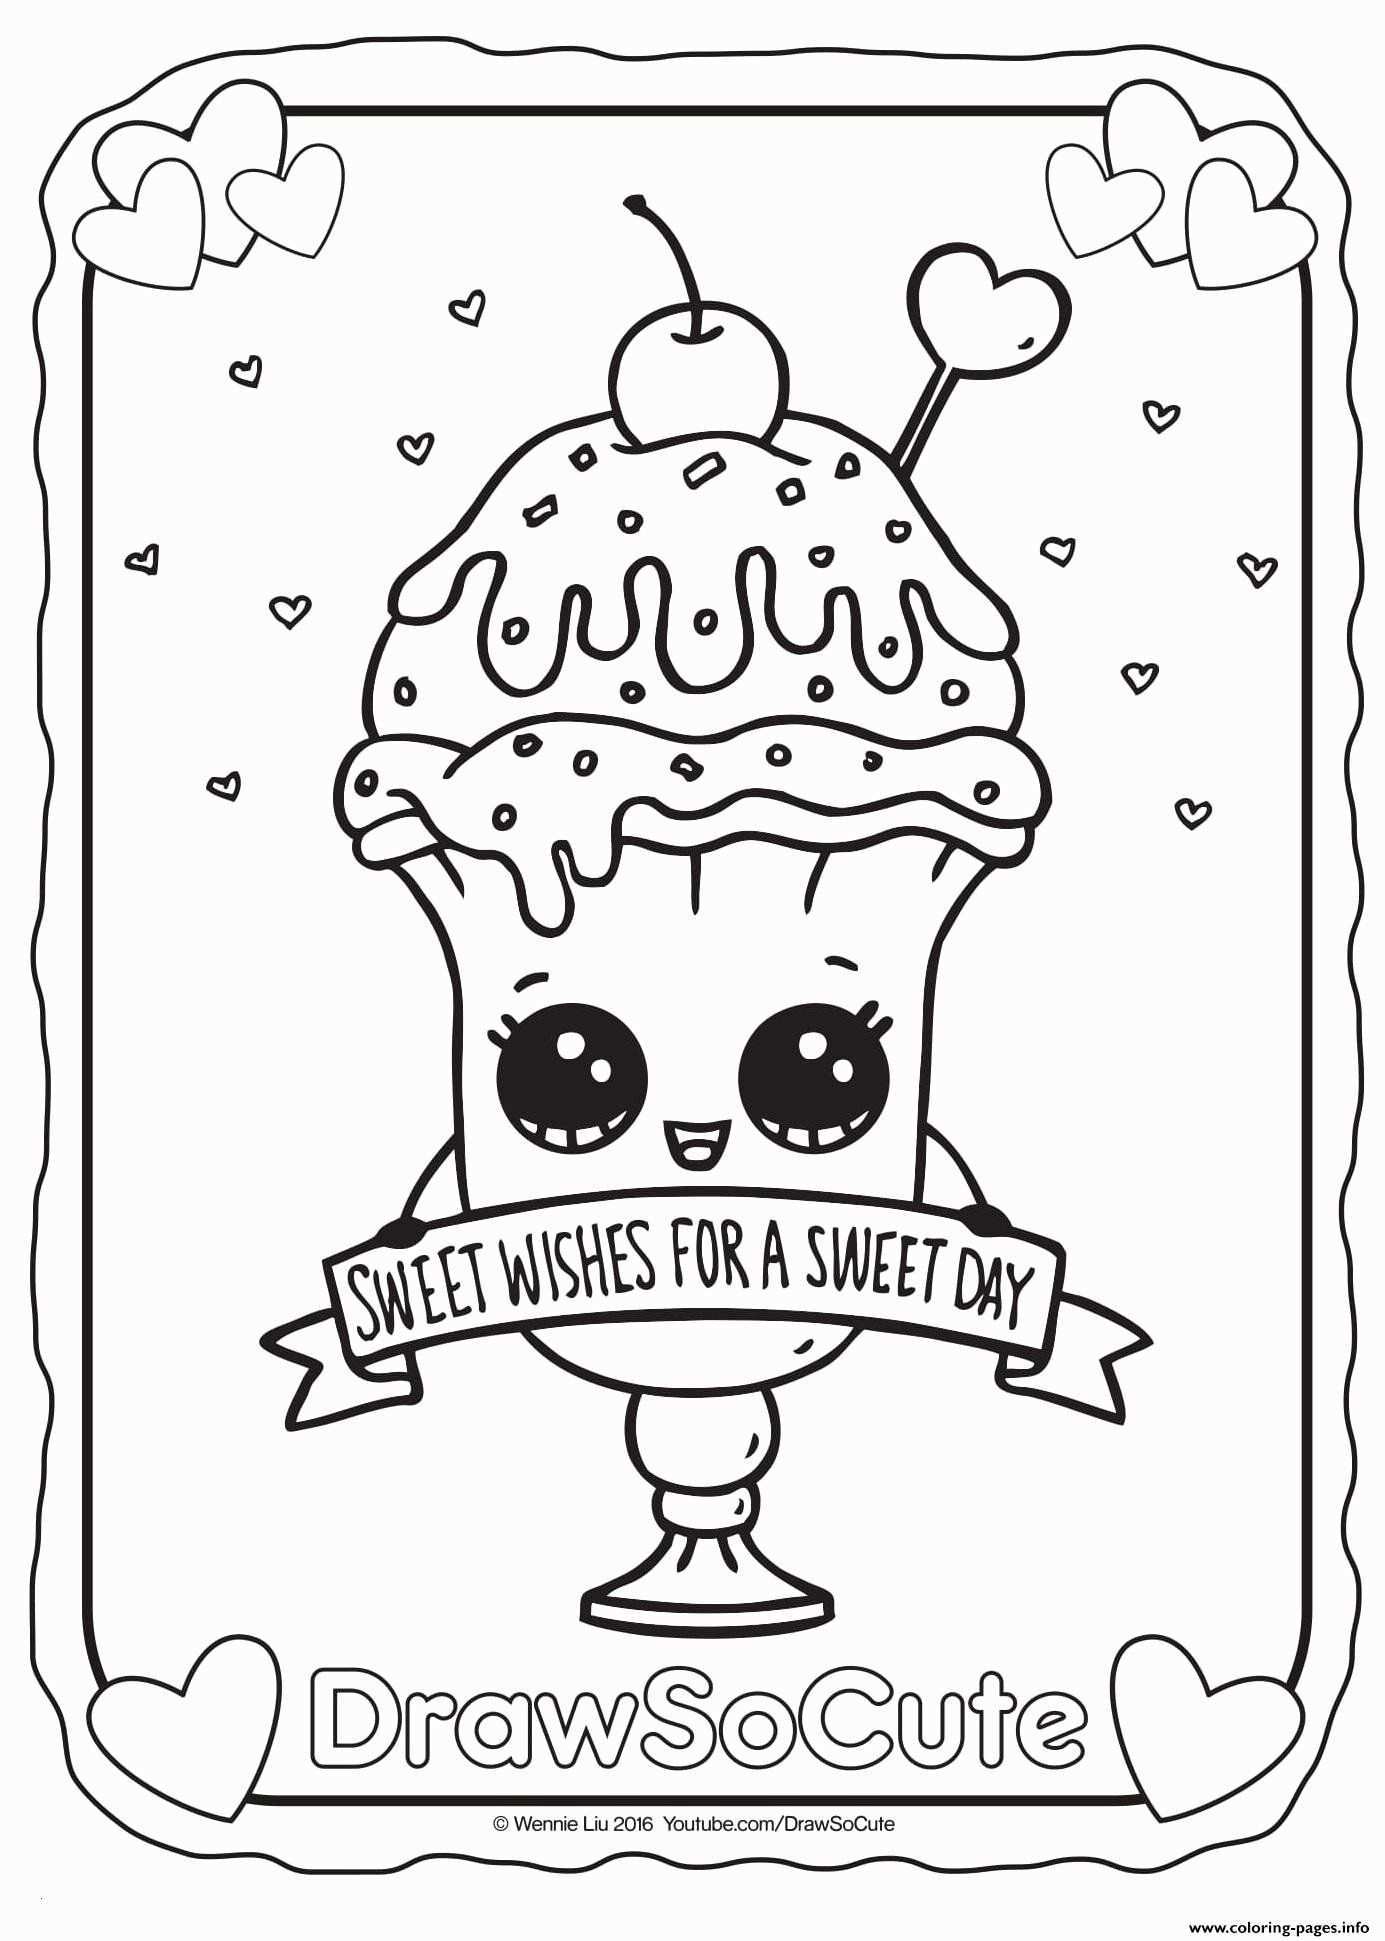 Kawaii Coloring Pages Animals Unique Fresh Cute Food Coloring Pages Tintuc247 Kleurpl